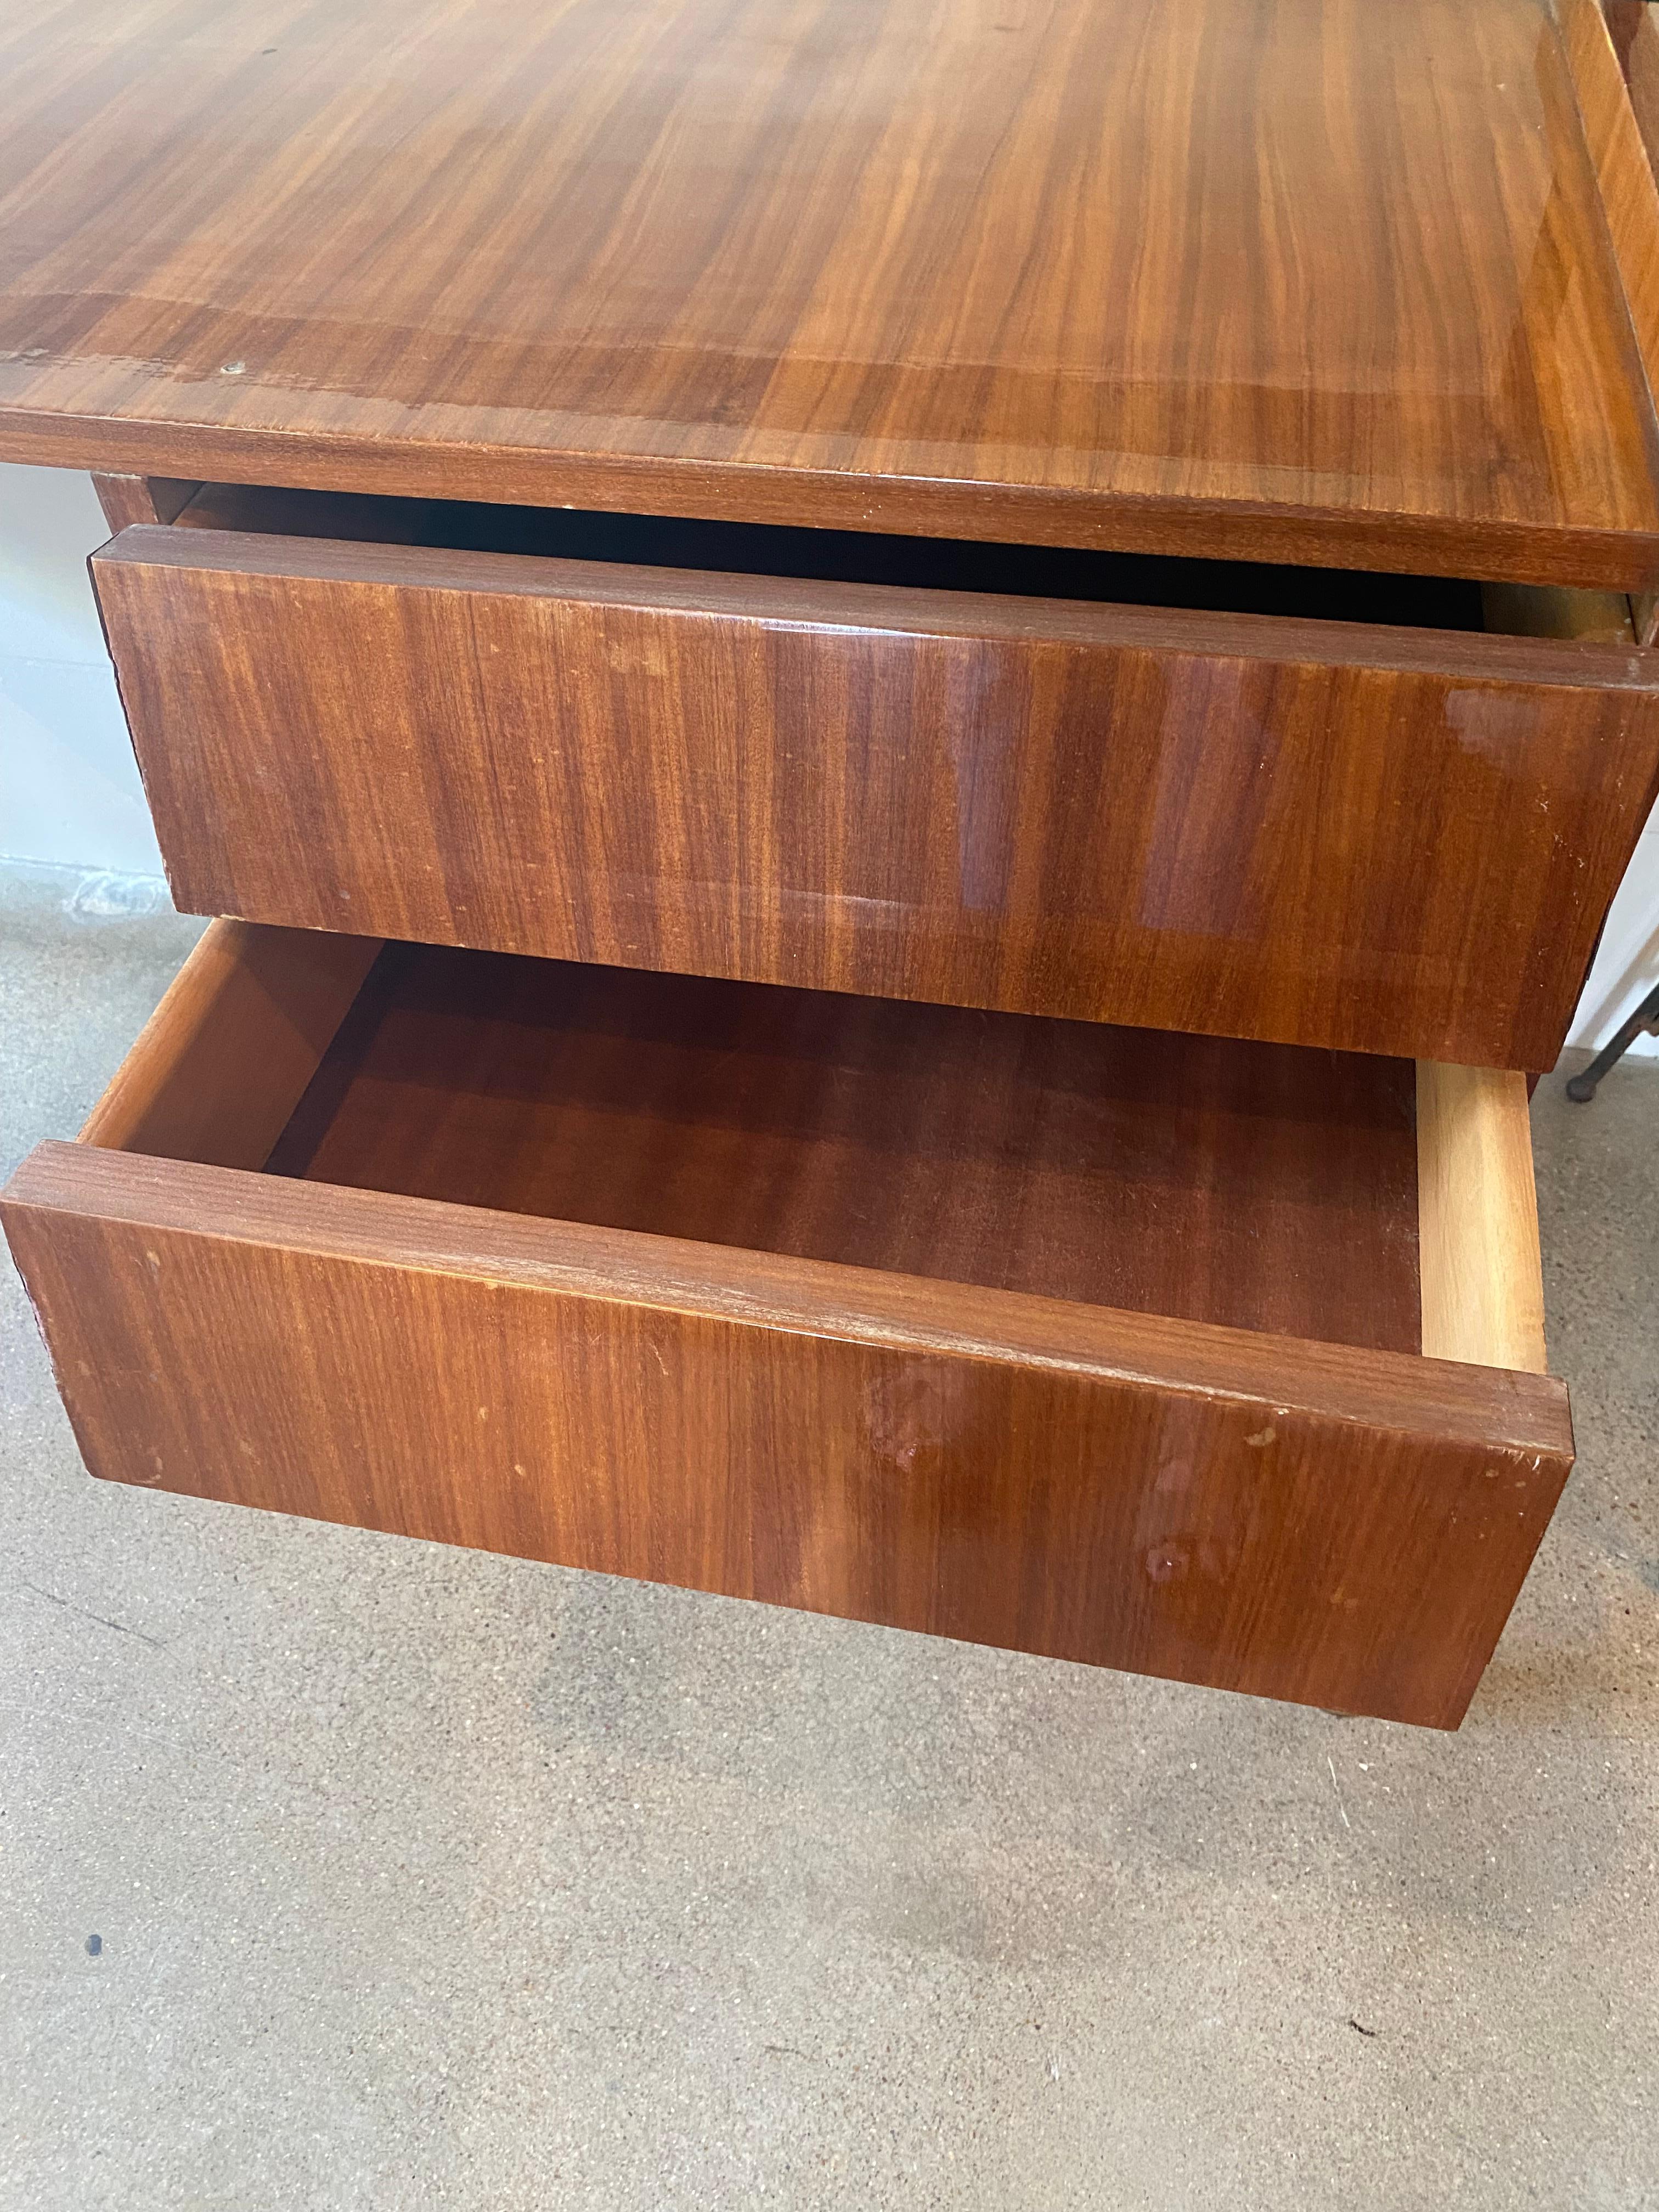 Italian Mid-Century Modern Desk with Shelves, Style of Ico Parisi For Sale 9